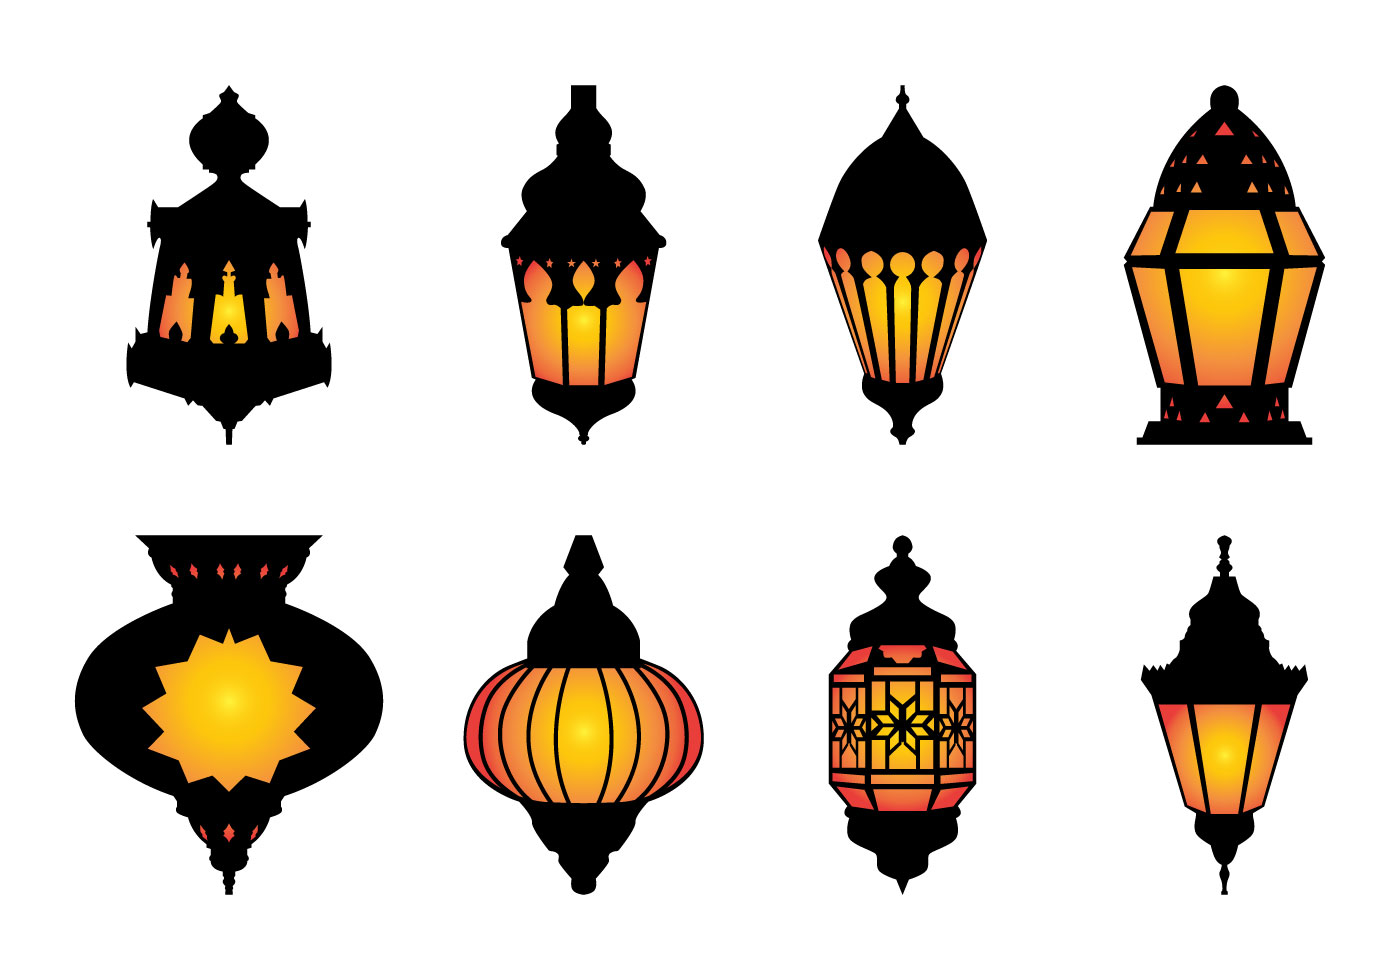 Table Lamp Free Vector Art - (3765 Free Downloads)